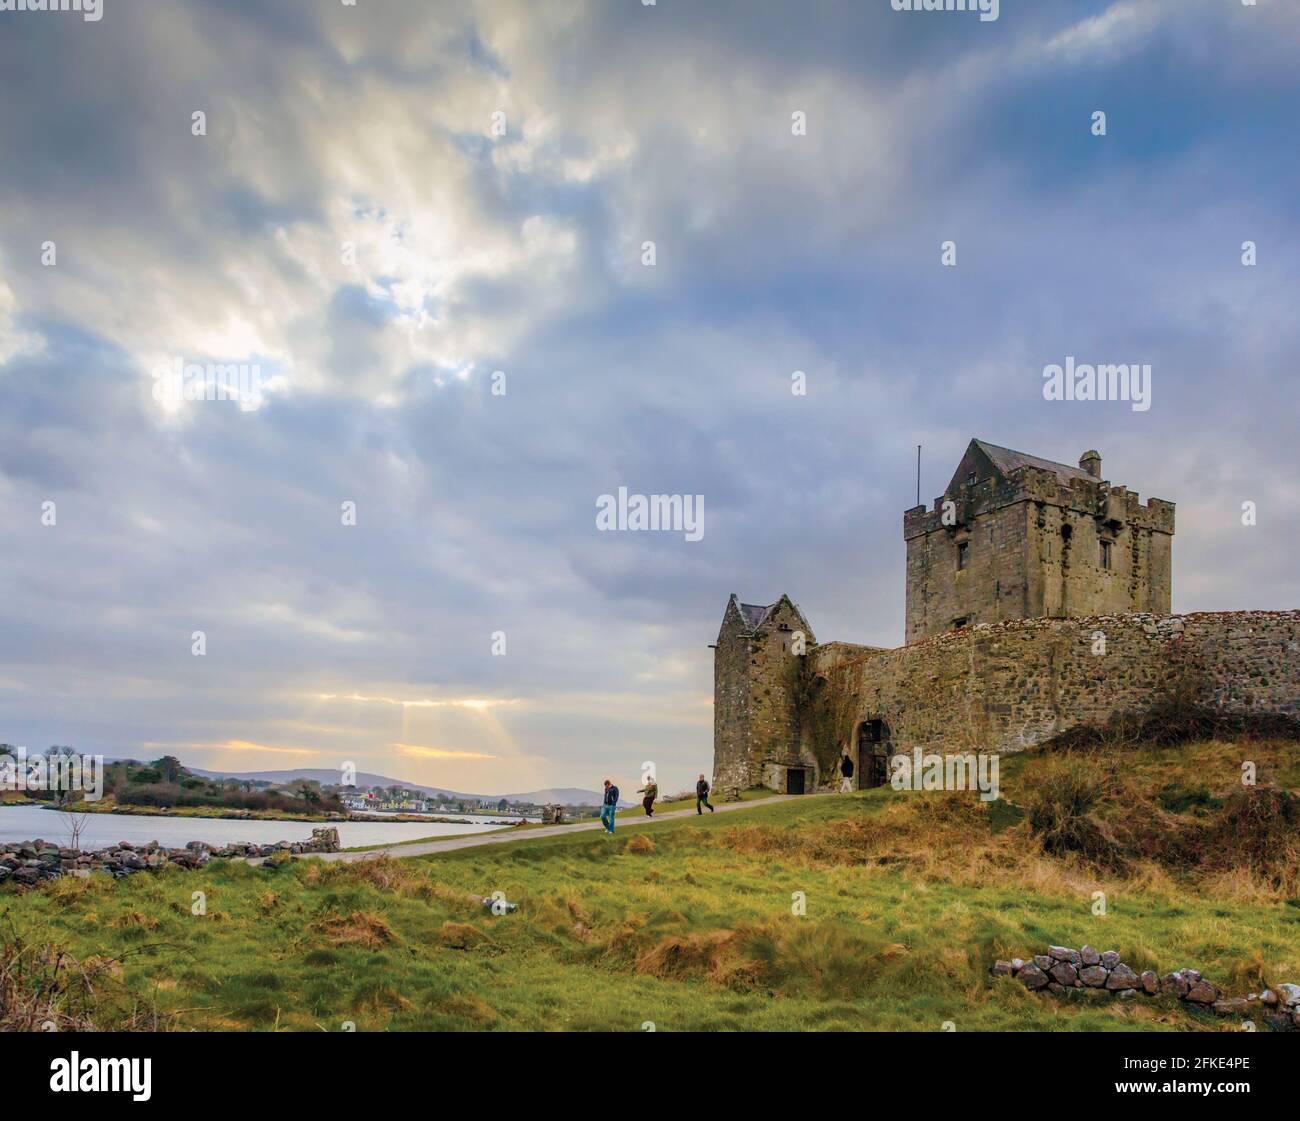 Dunguaire Castle at Kinvara, County Galway, Republic of Ireland. Eire. This type of structure is known as a tower house.  Tower houses evolved for bot Stock Photo